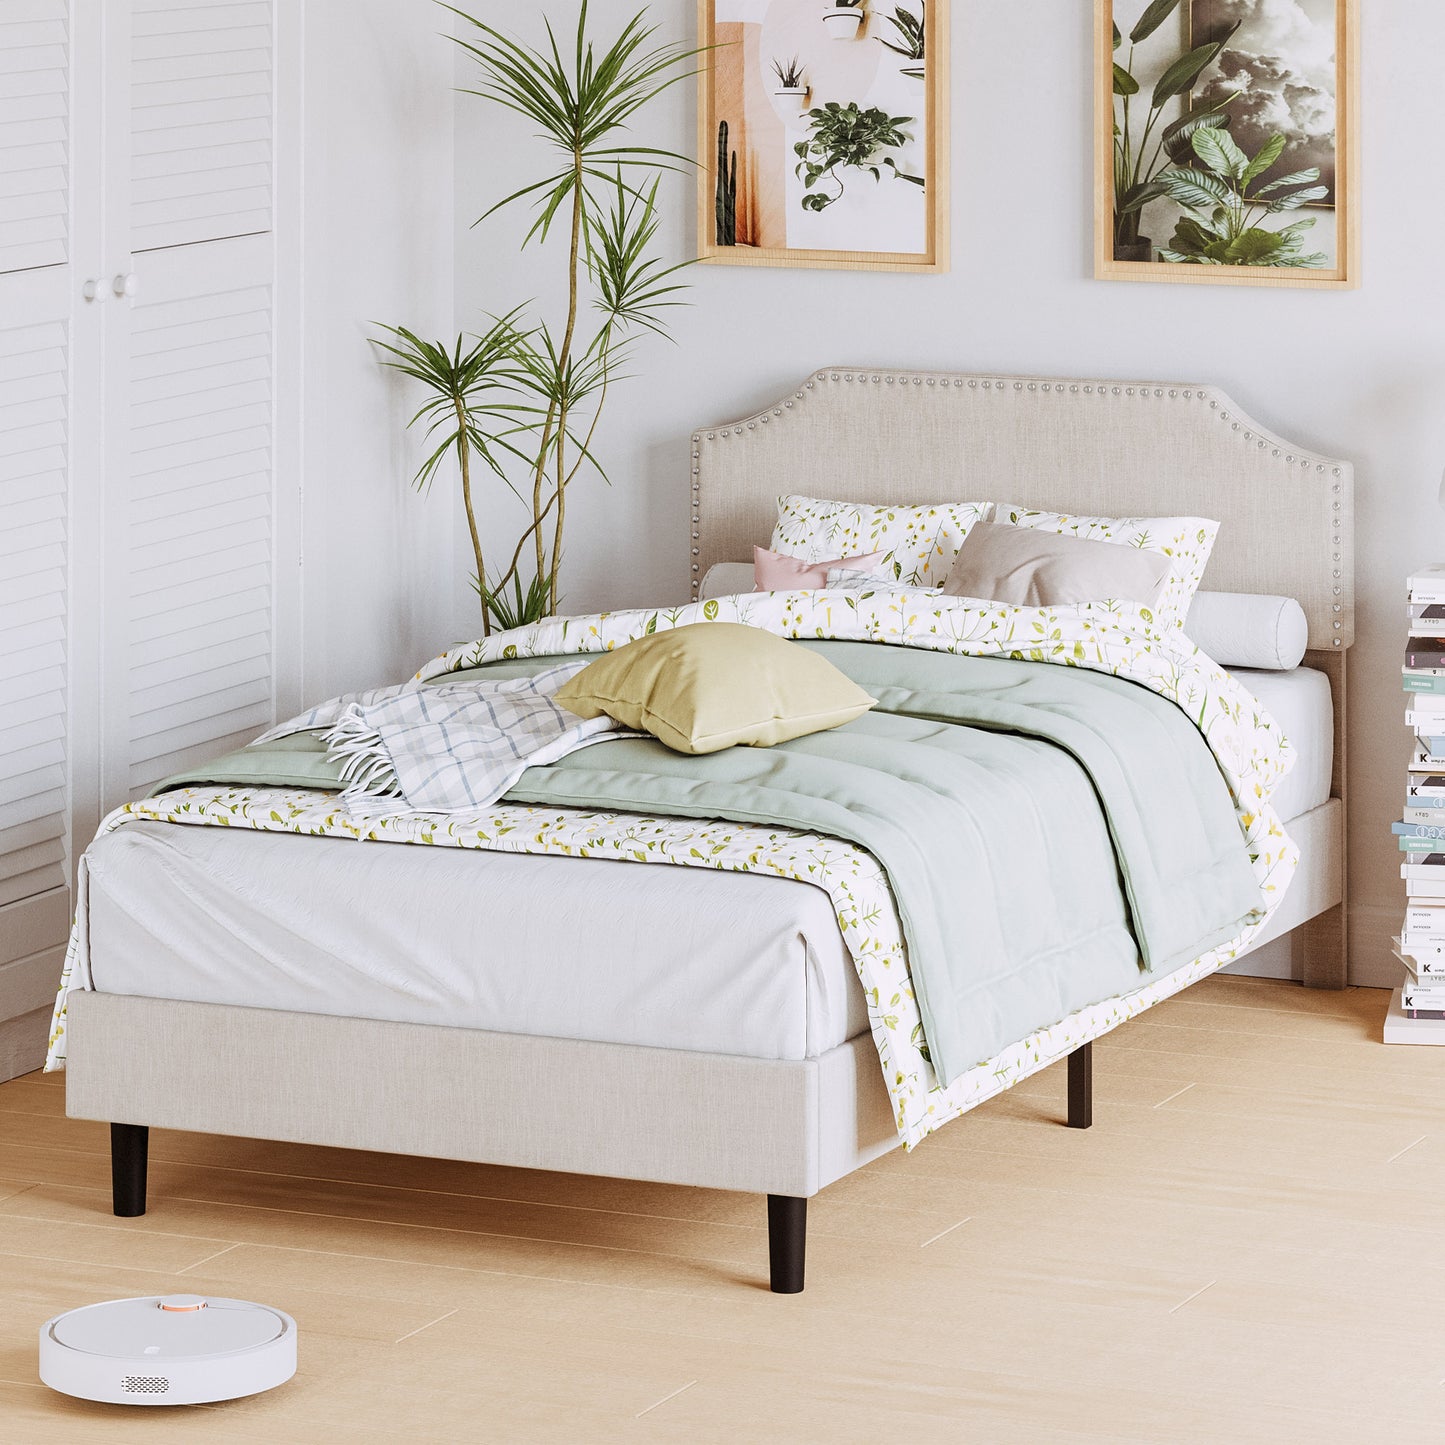 Twin Size Upholstered Platform Bed Frame with Headboard